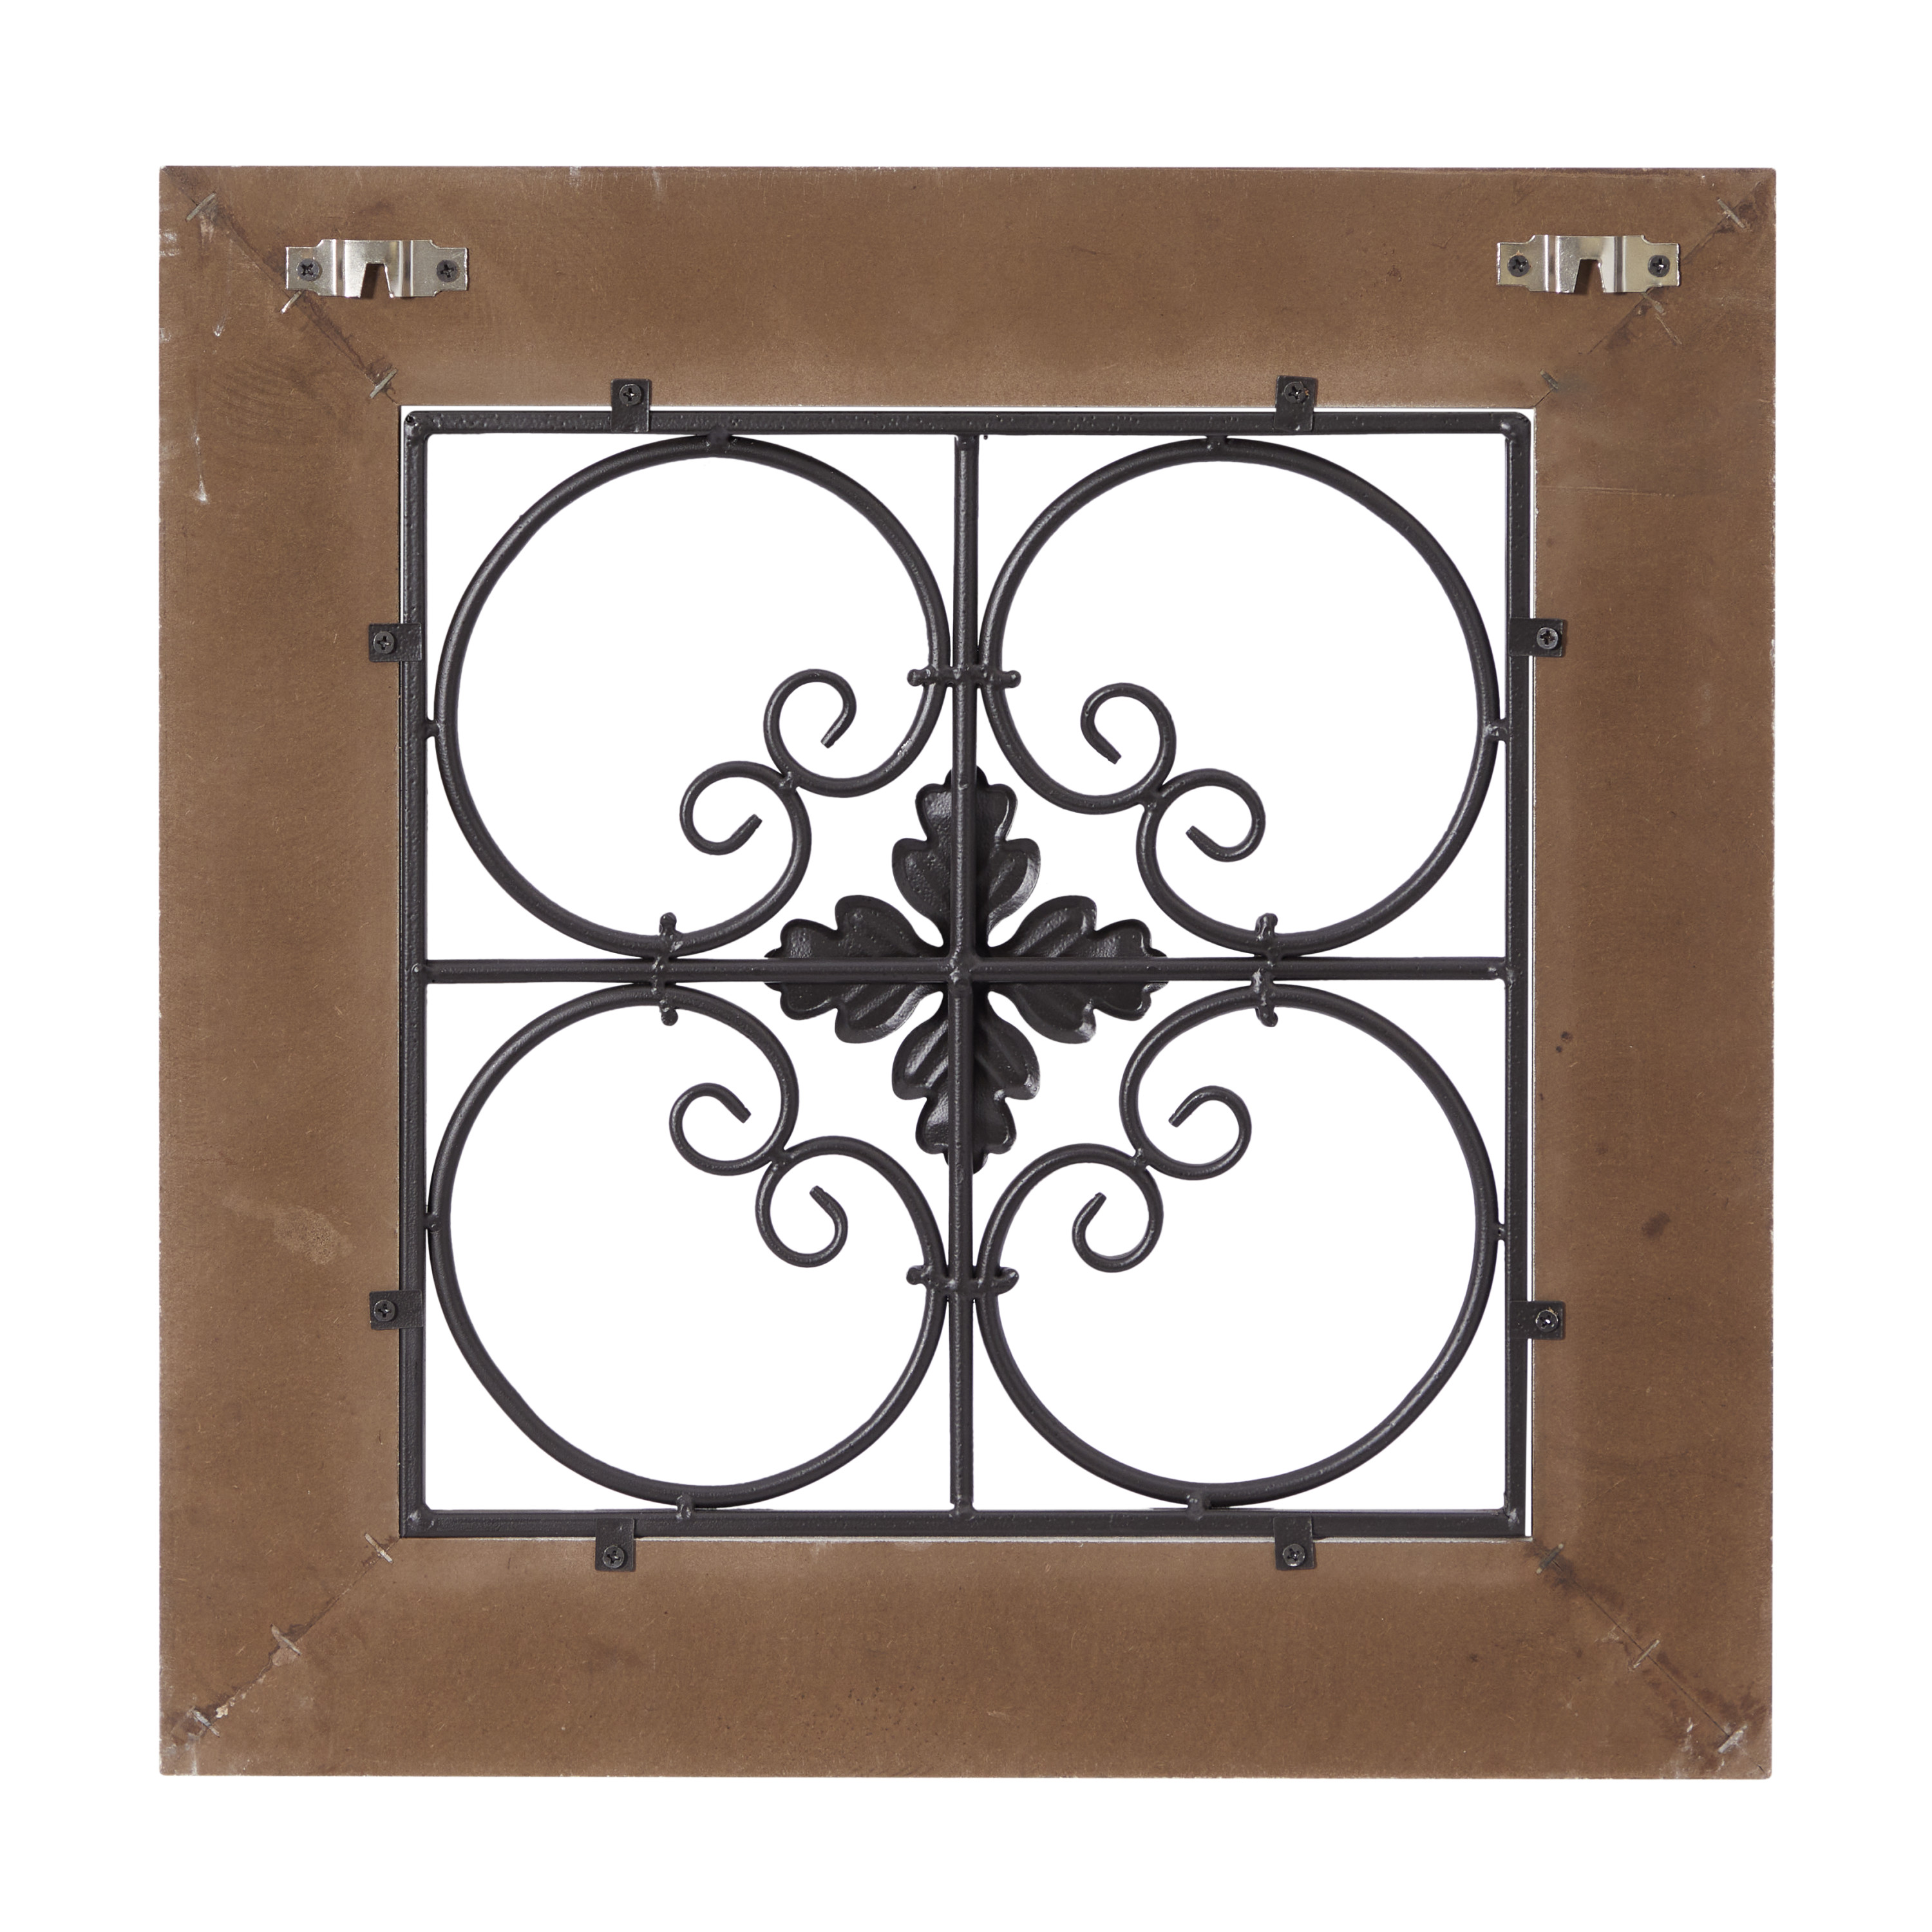 DecMode White Wood Scroll Wall Decor with Metal Relief (4 Count) - image 10 of 15